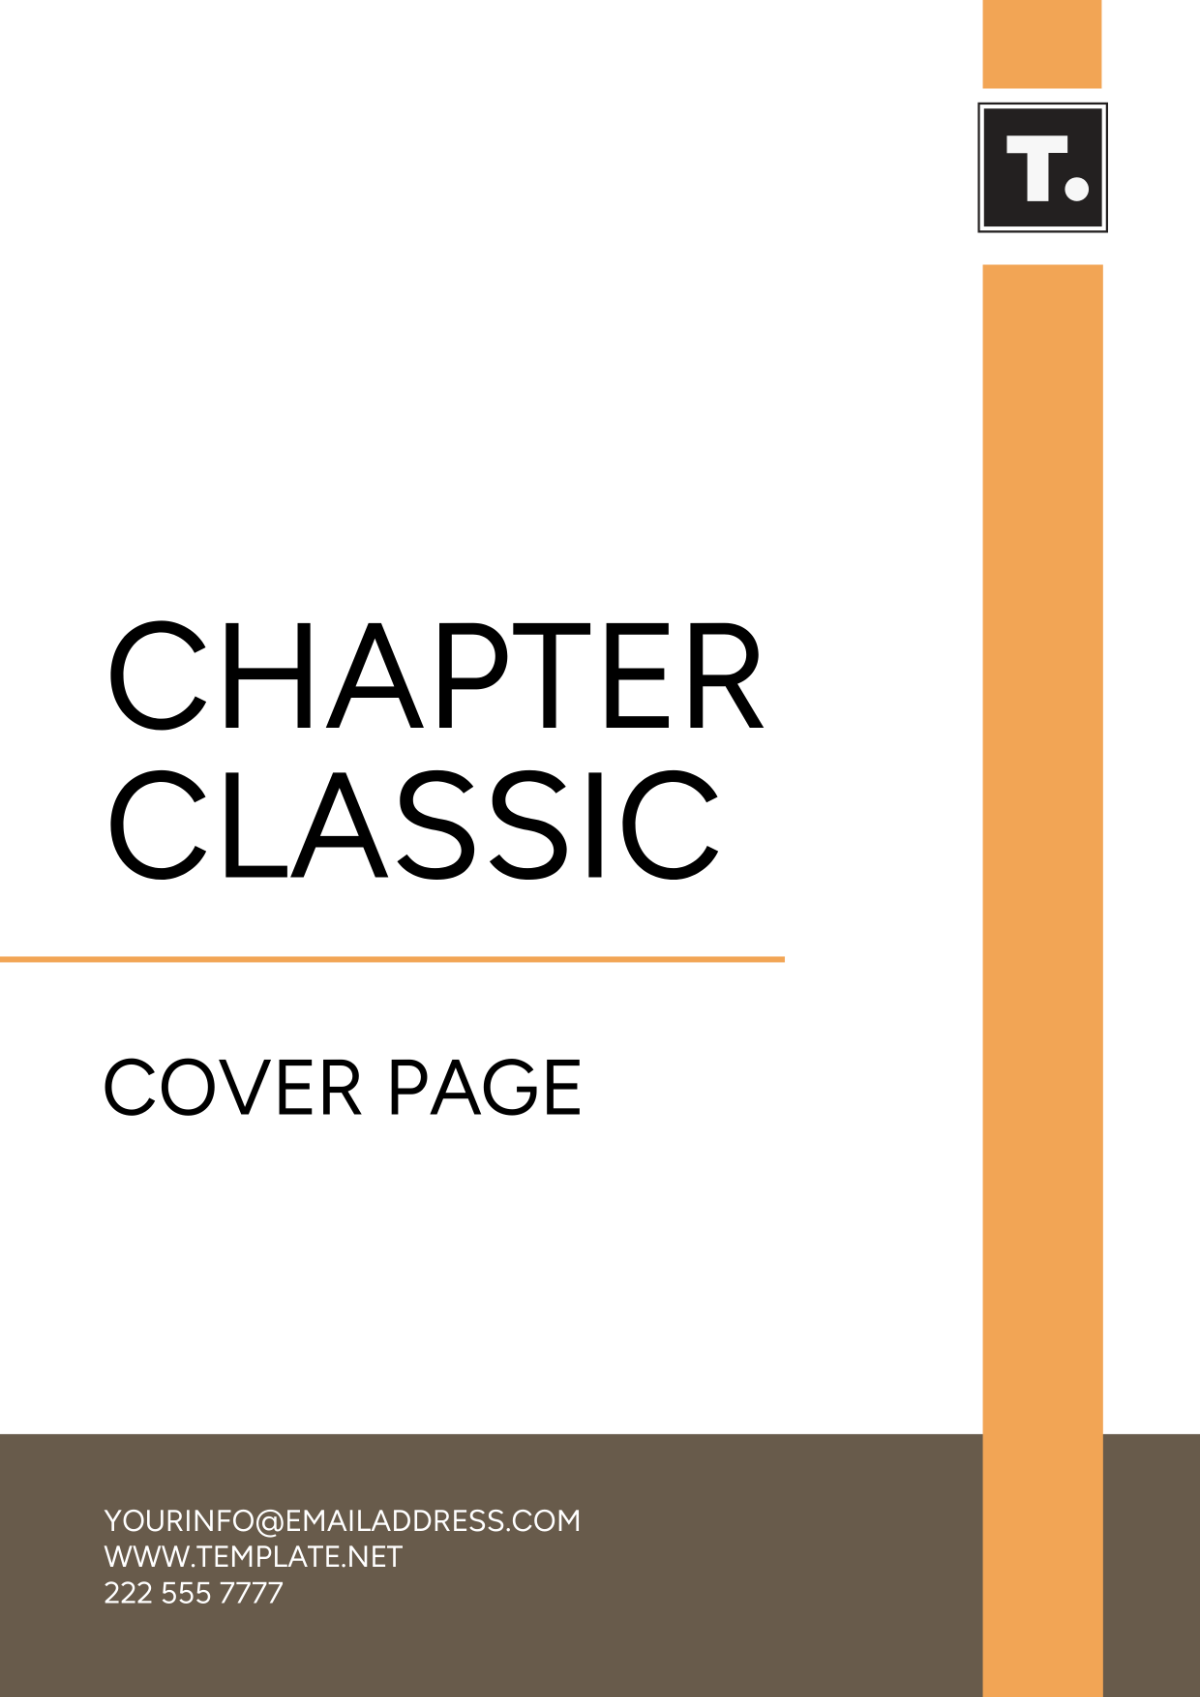 Free Chapter Classic Cover Page Template